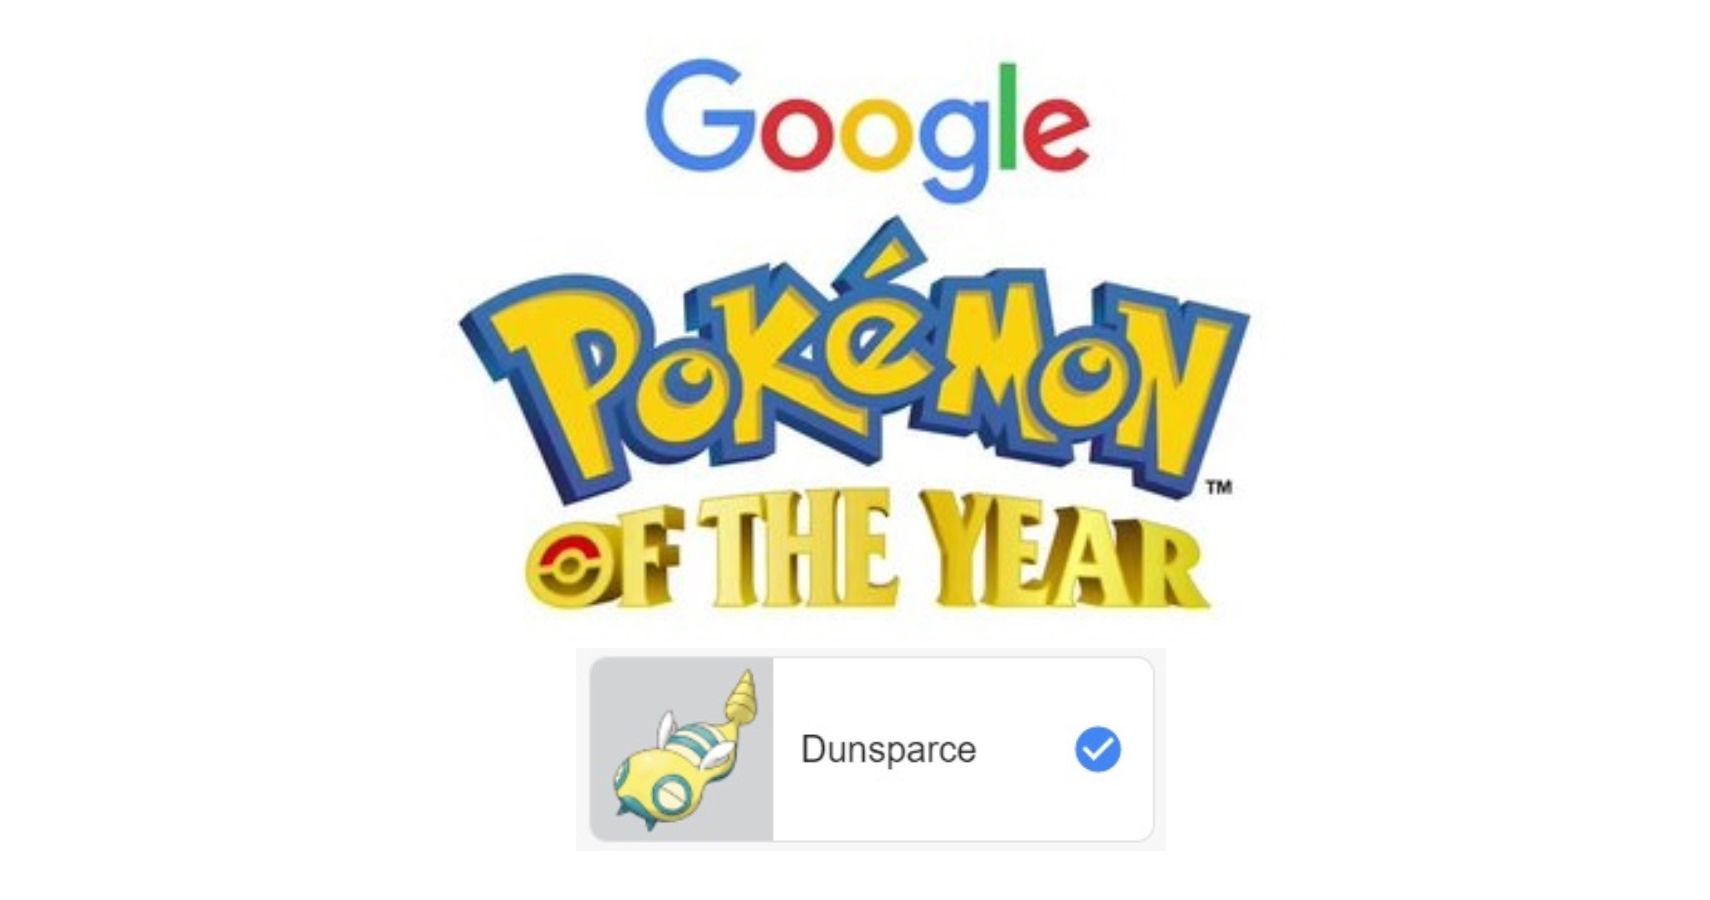 Google Has Opened Up Votes For Pokémon Of The Year For Pokémon Day